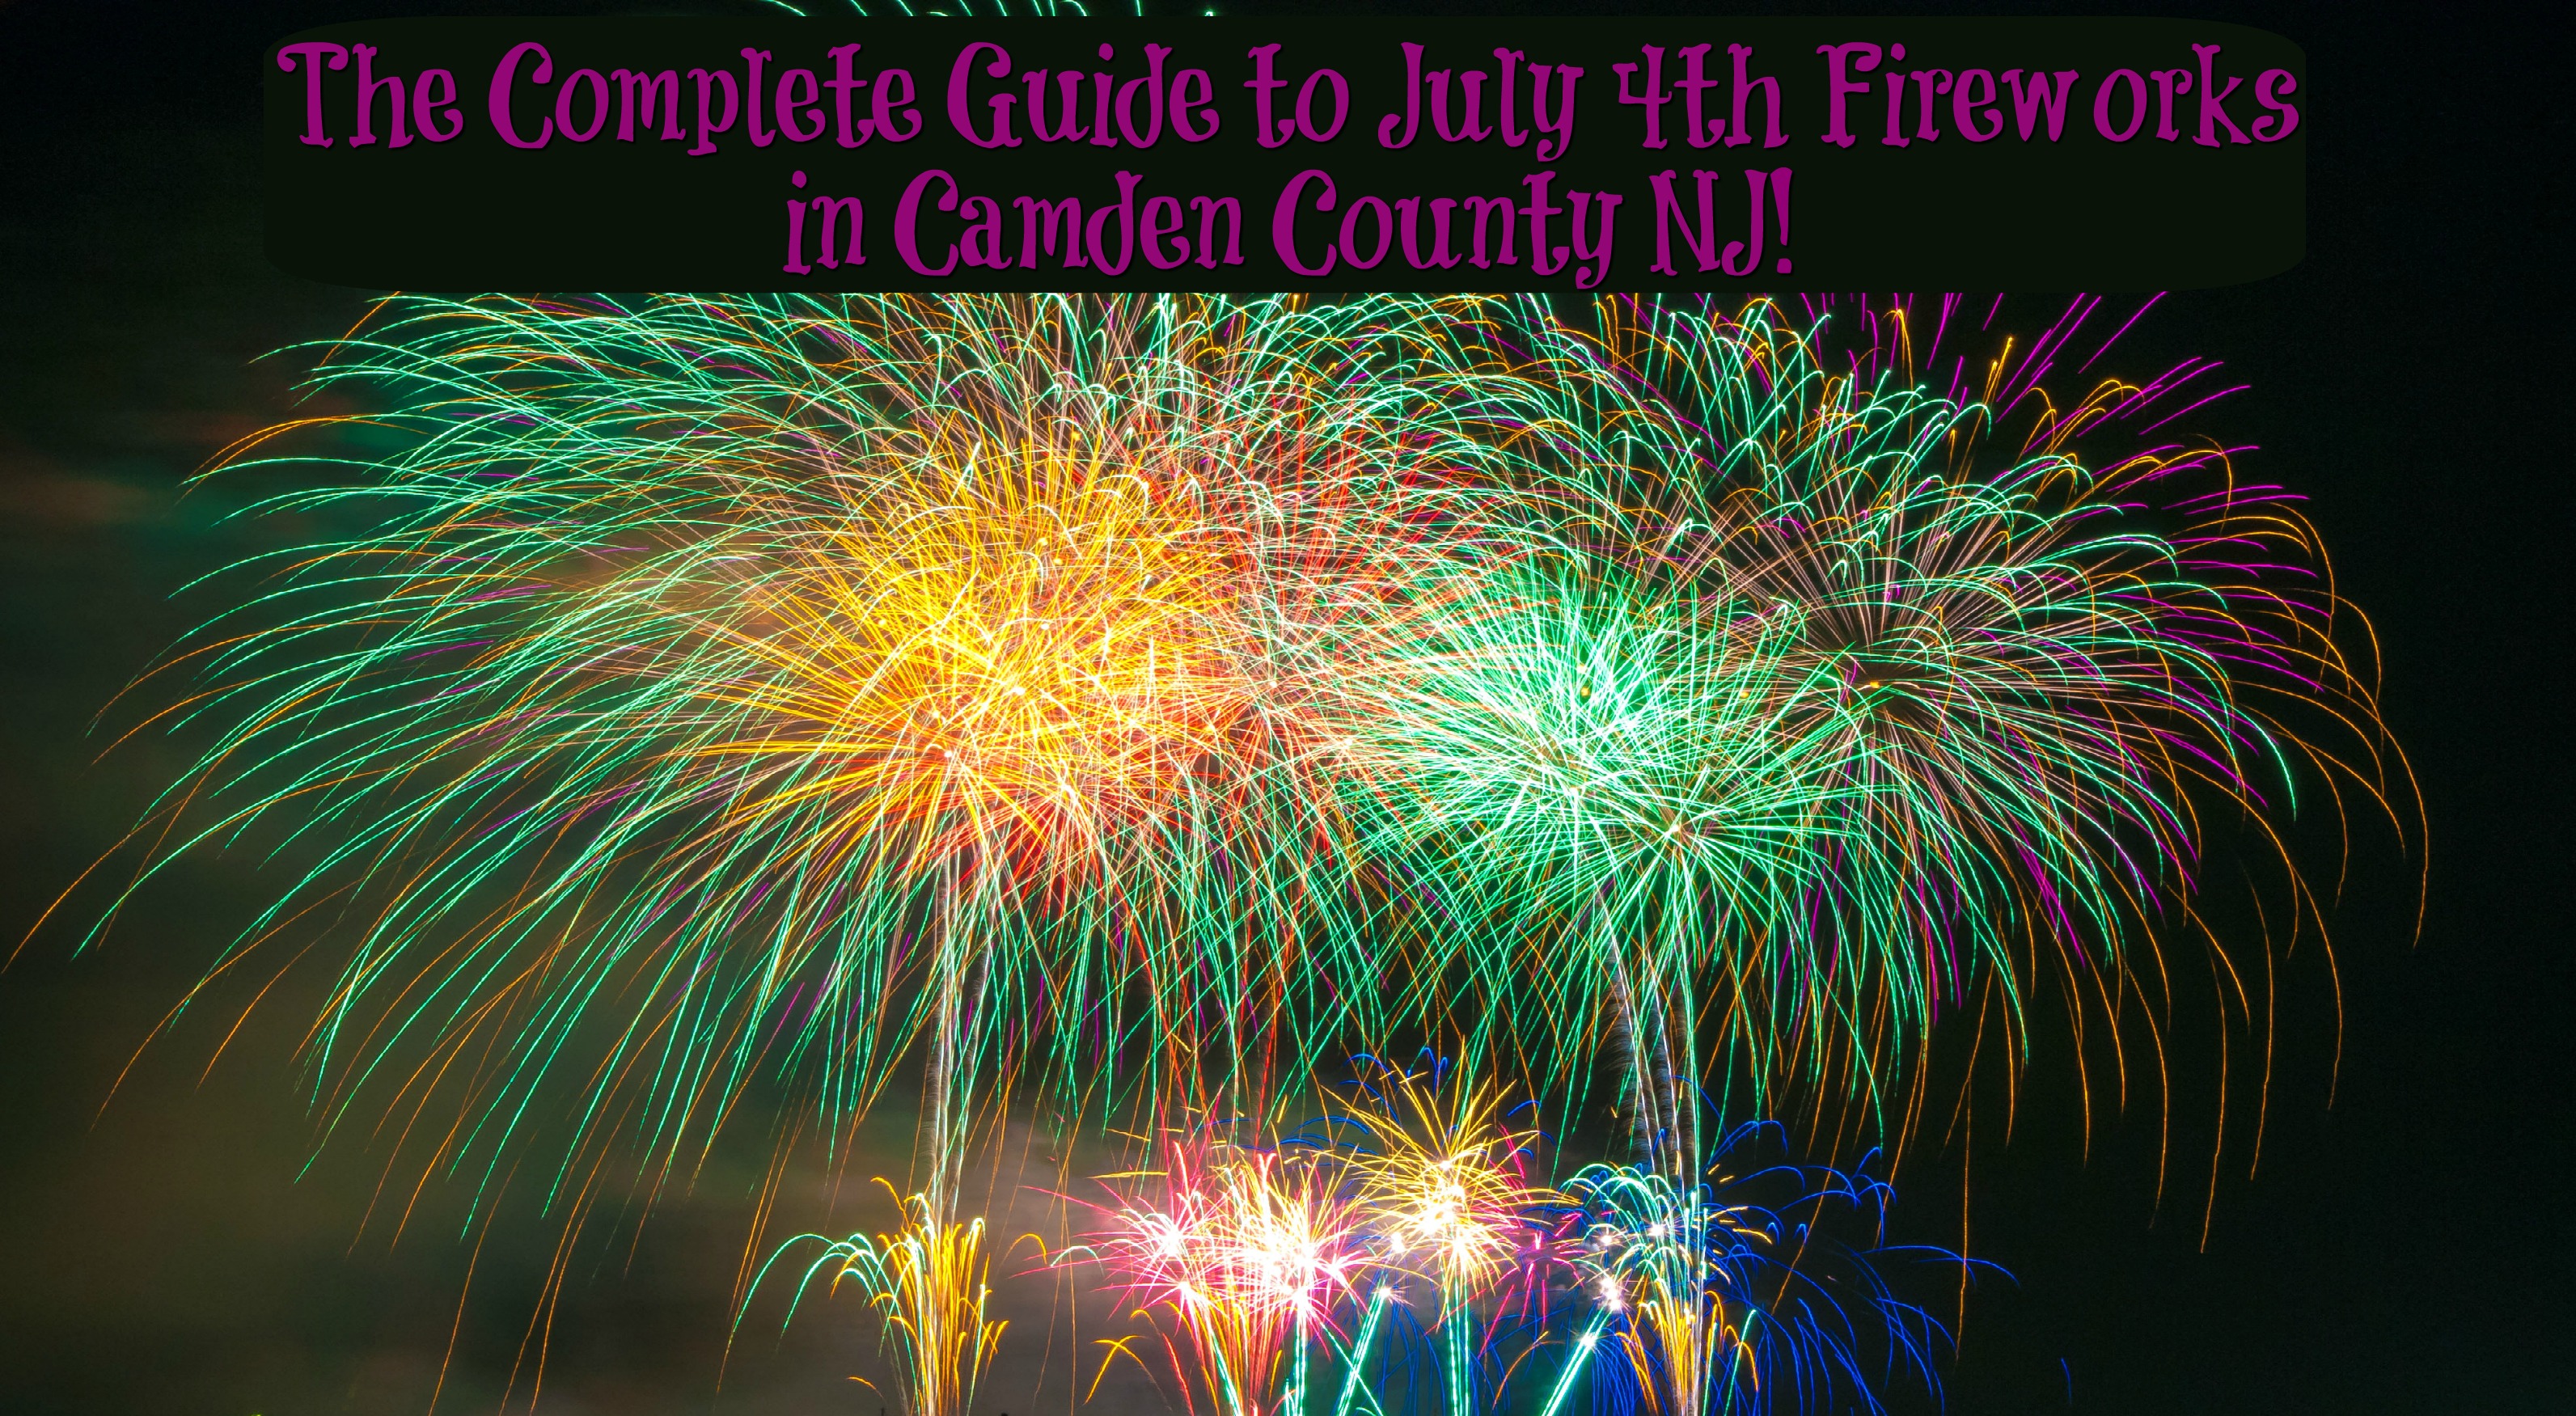 The Complete Guide to July 4th Fireworks in Camden County NJ 2018